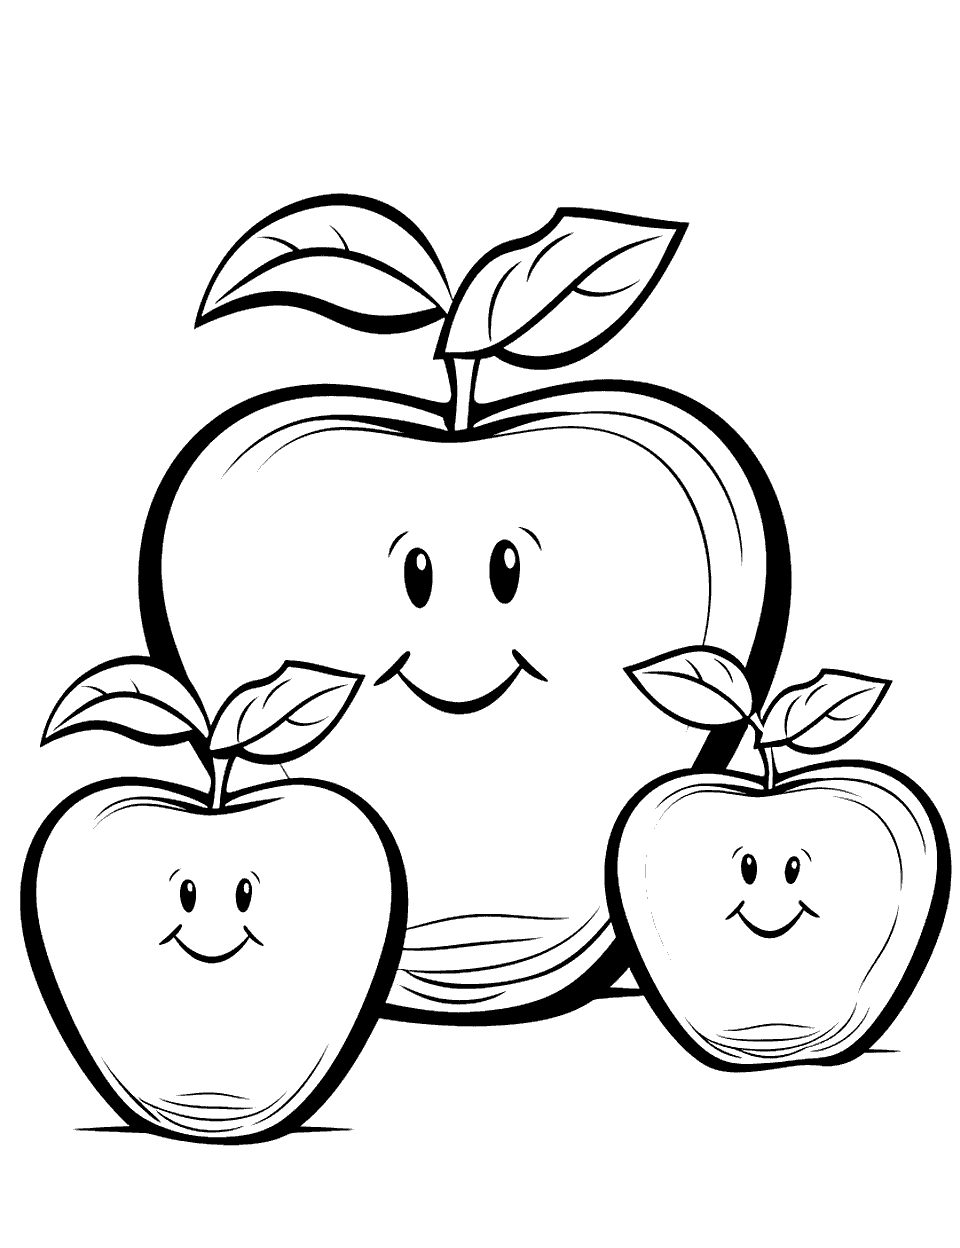 Happy Apple Family Coloring Page - A group of smiling apples with smiling expressions.